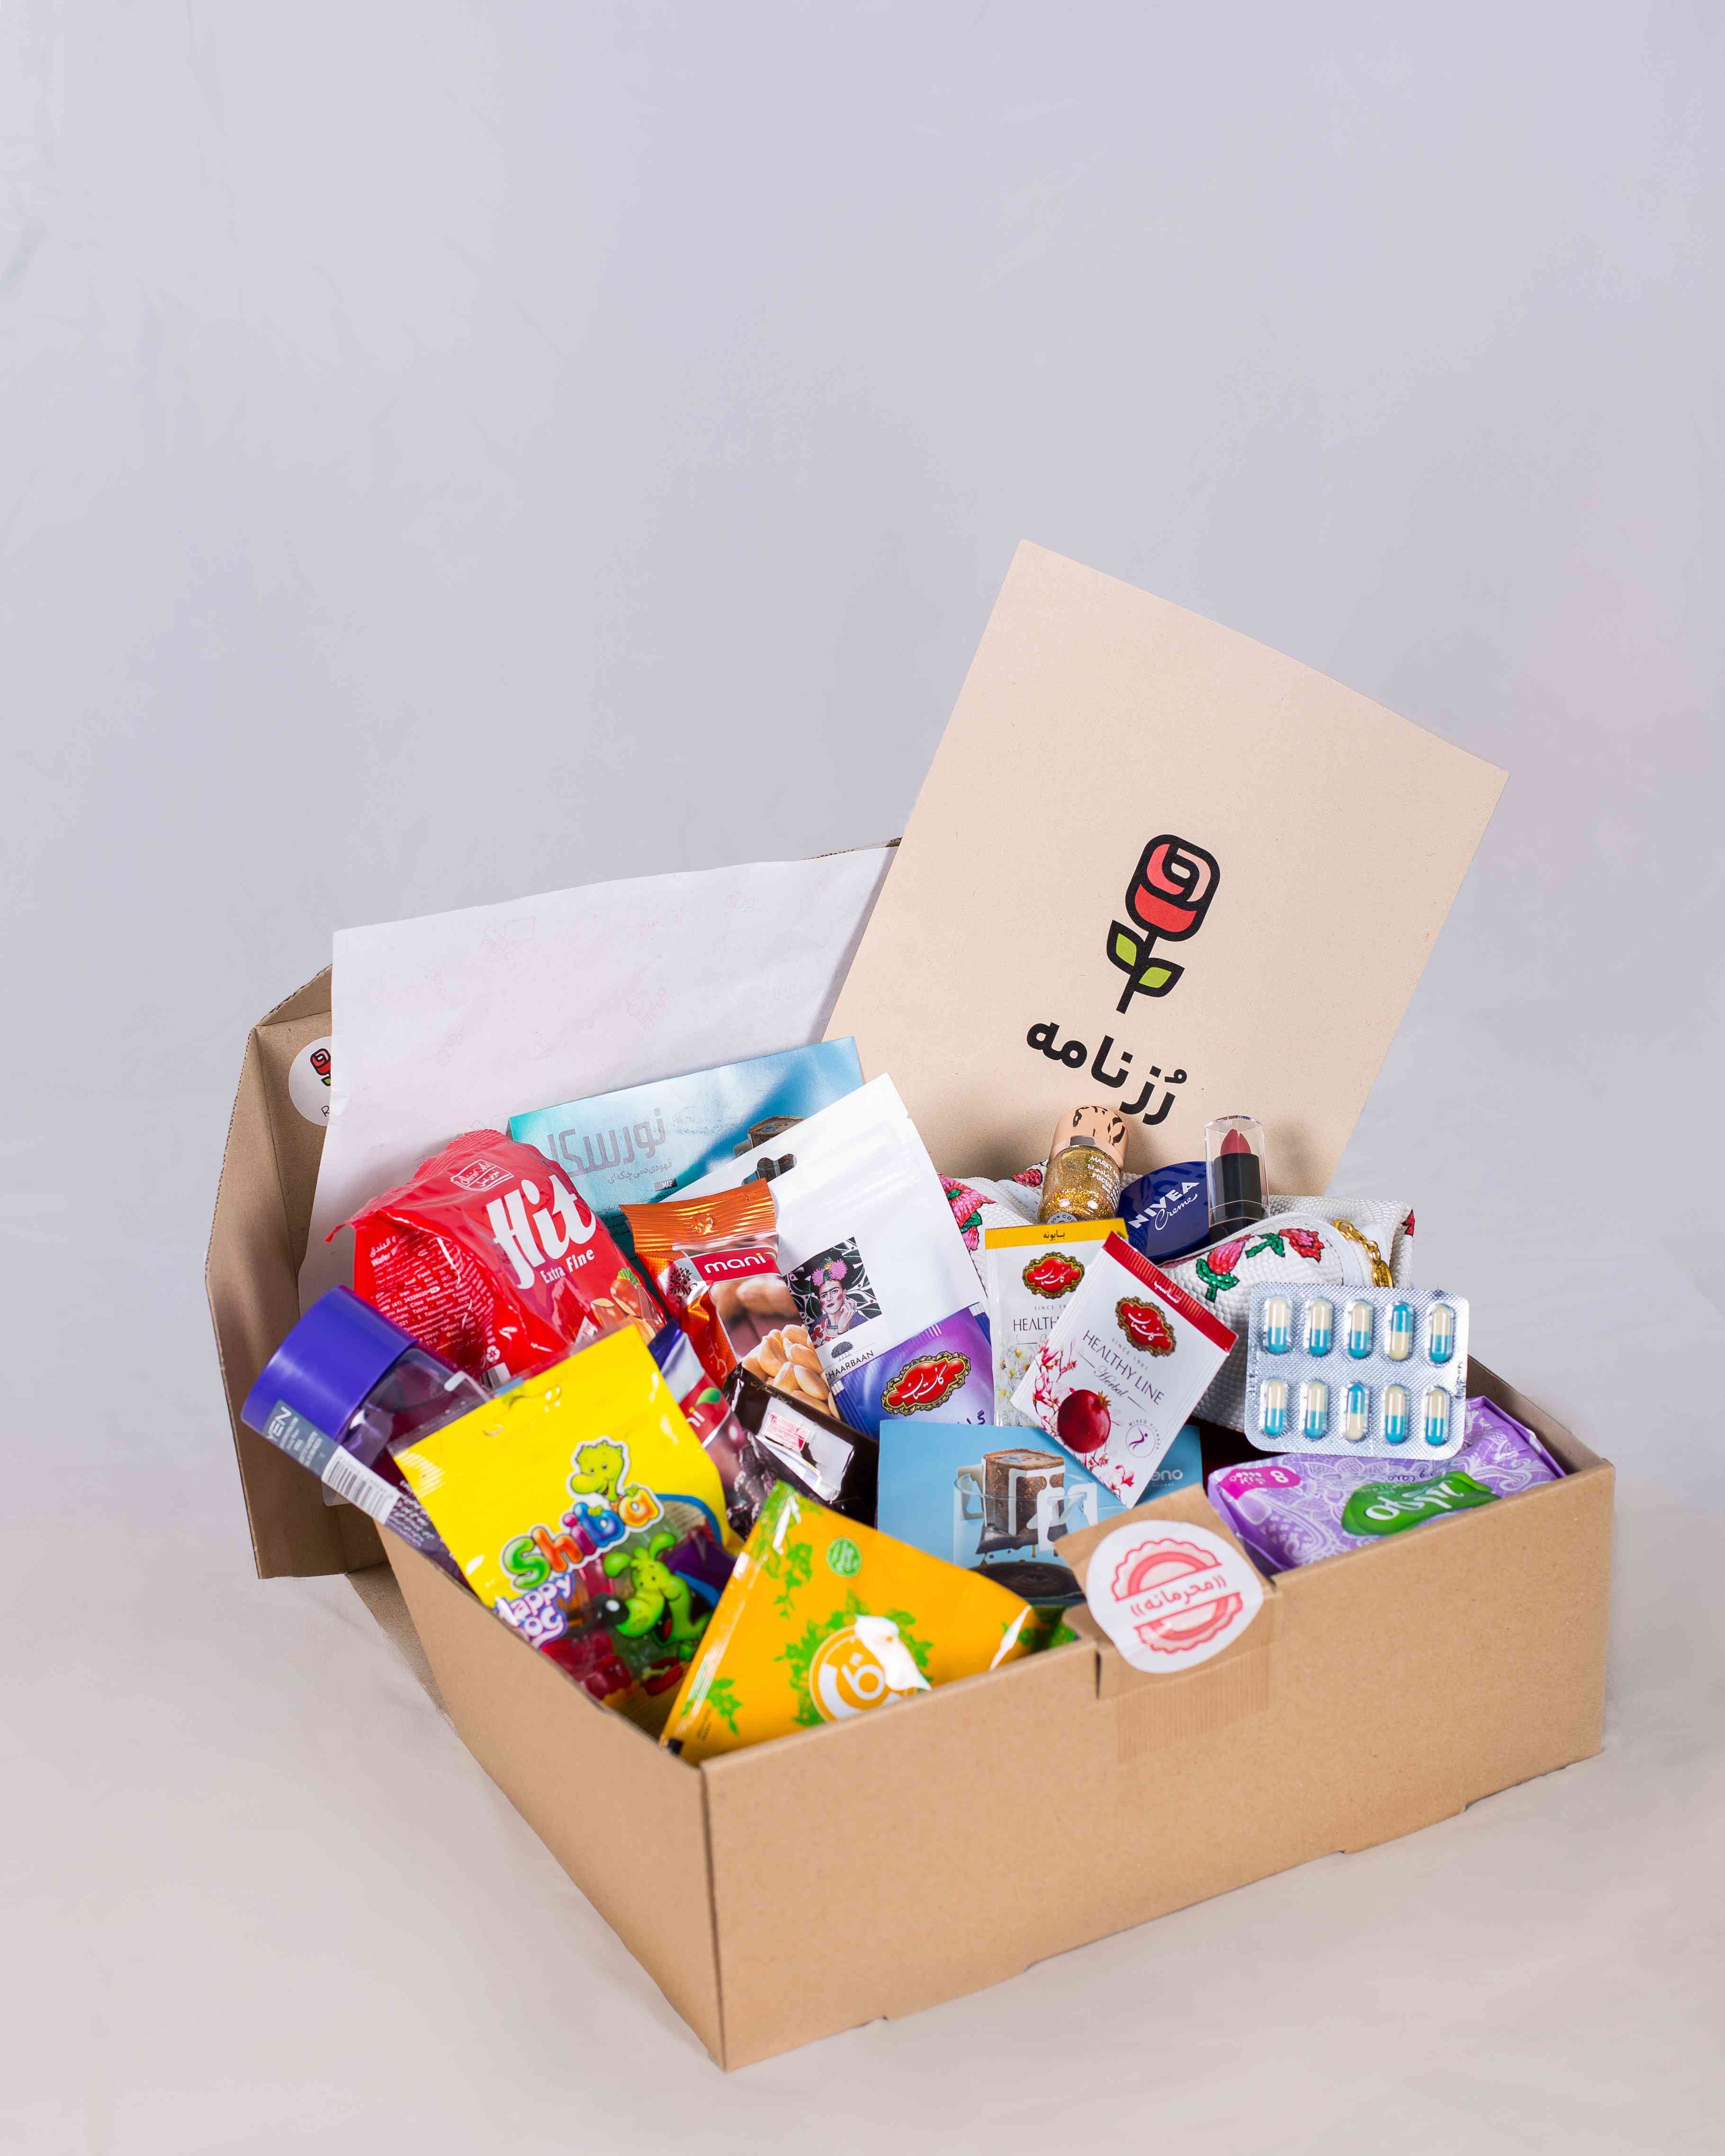 Choosing the Right Products for Your Subscription Box: Strategies for Success